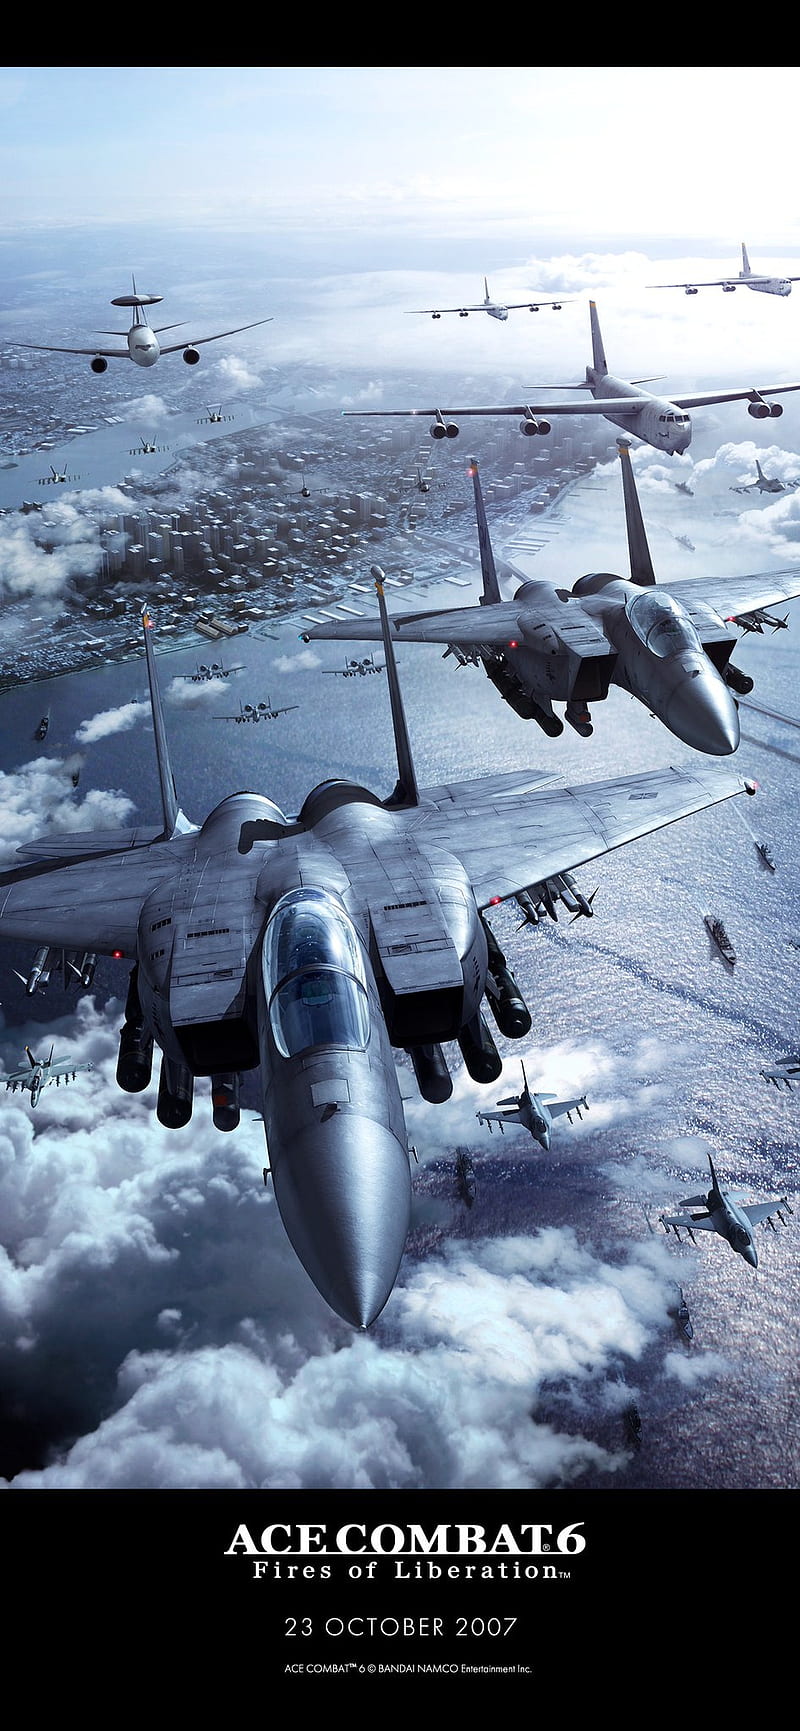 Download Ace Combat wallpapers for mobile phone free Ace Combat HD  pictures